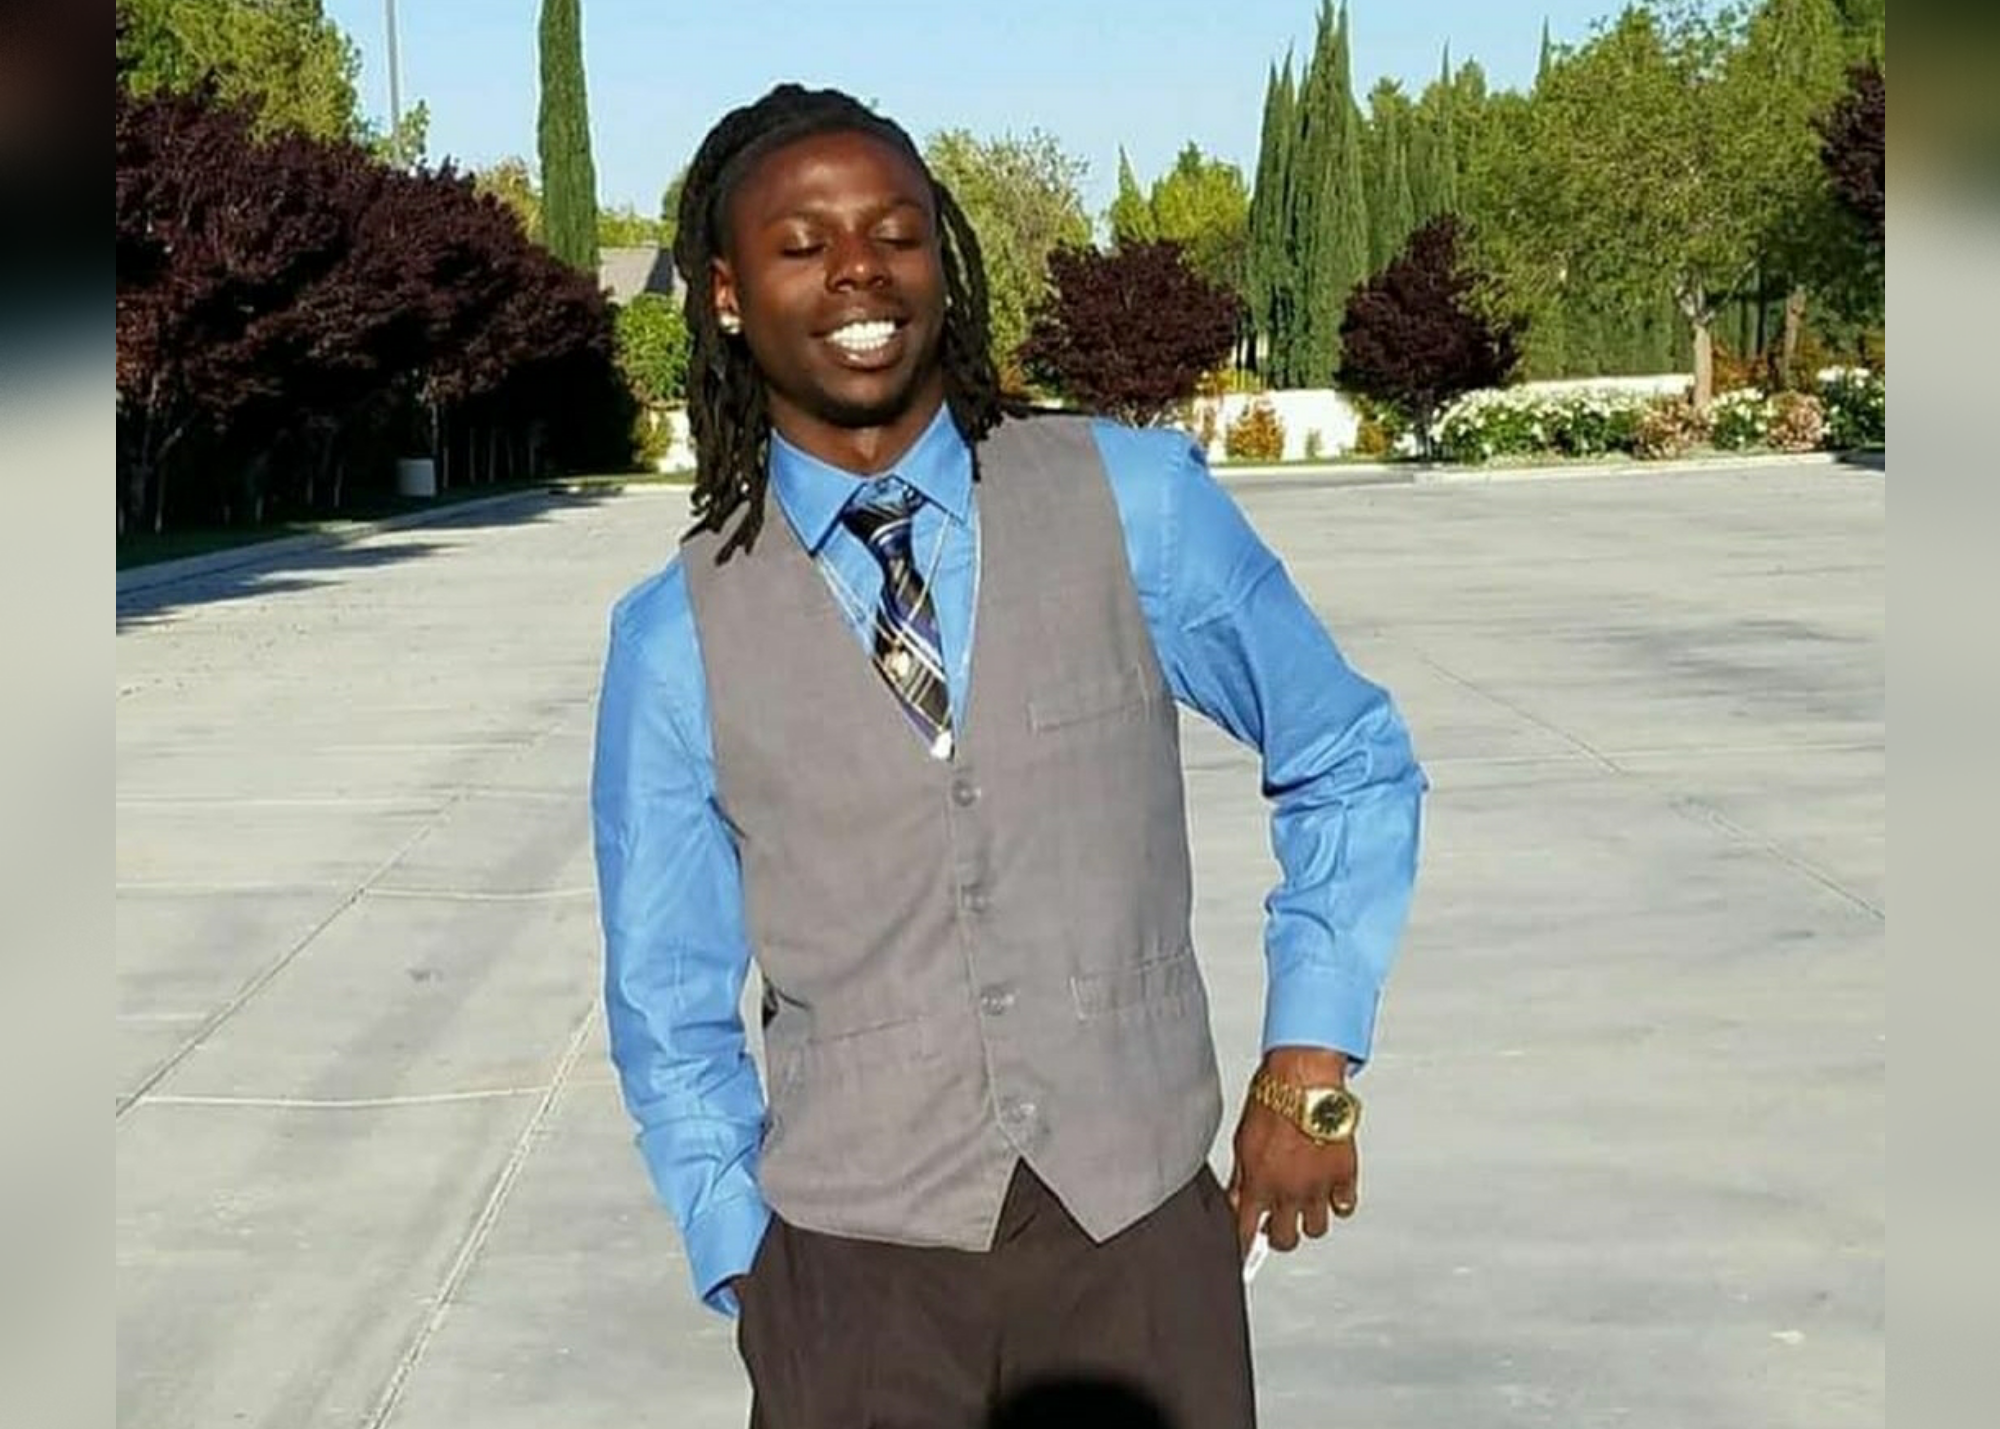 Body Of A Young Black Man Found Hanging From A Tree In Palmdale, CA